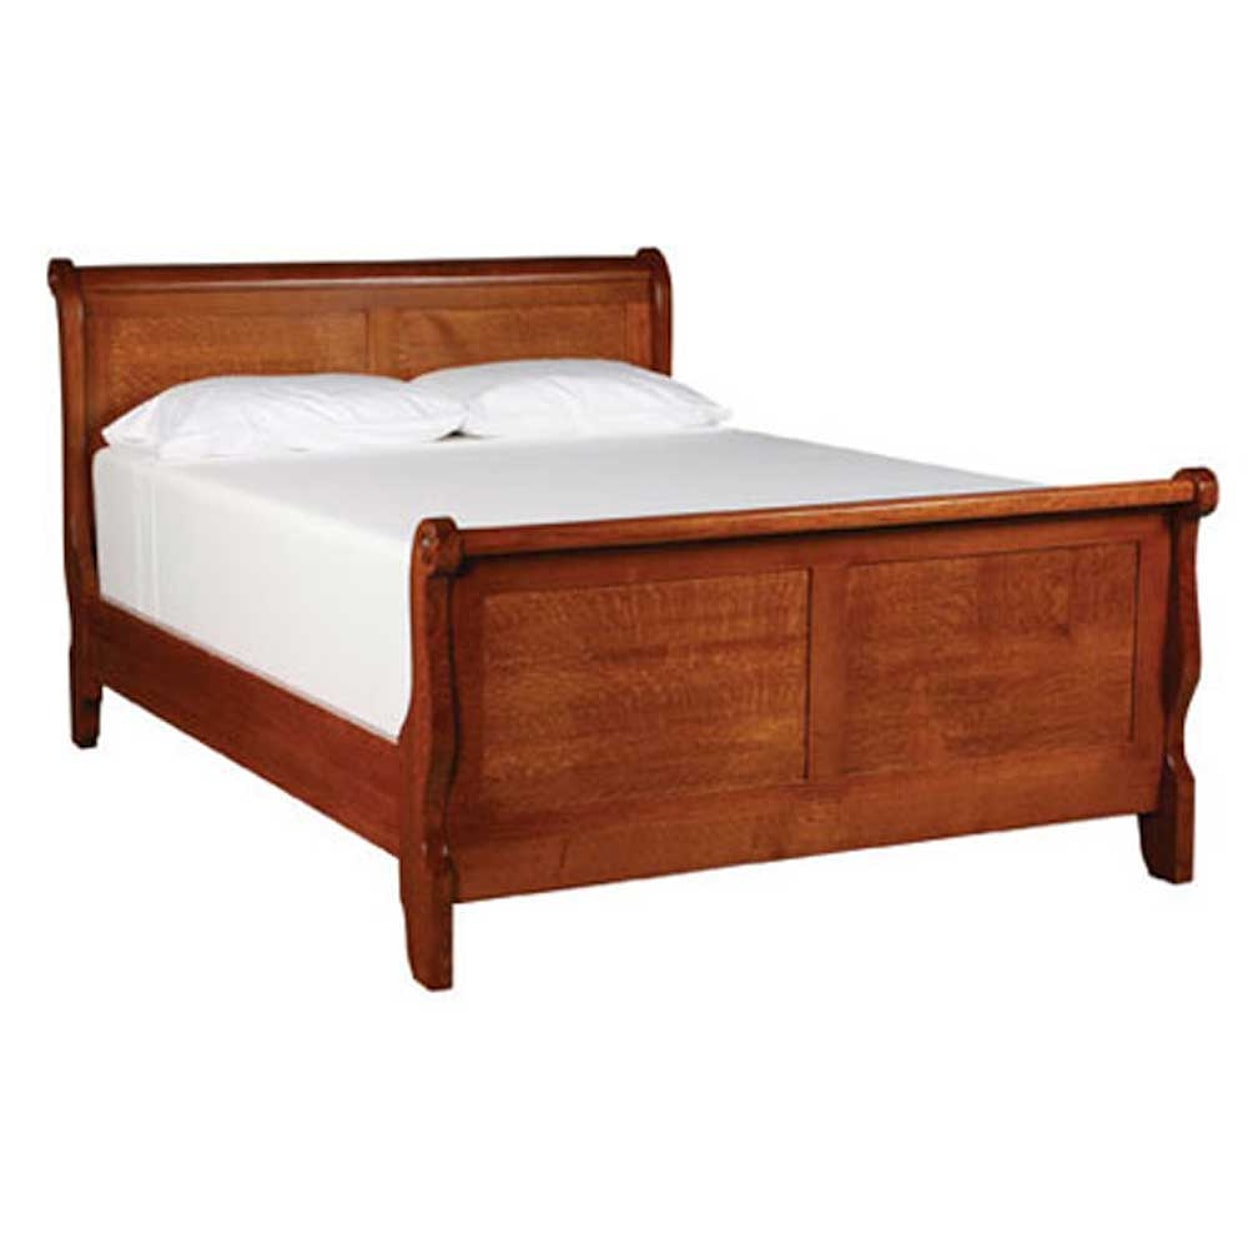 Simply Amish Empire Full Sleigh Bed